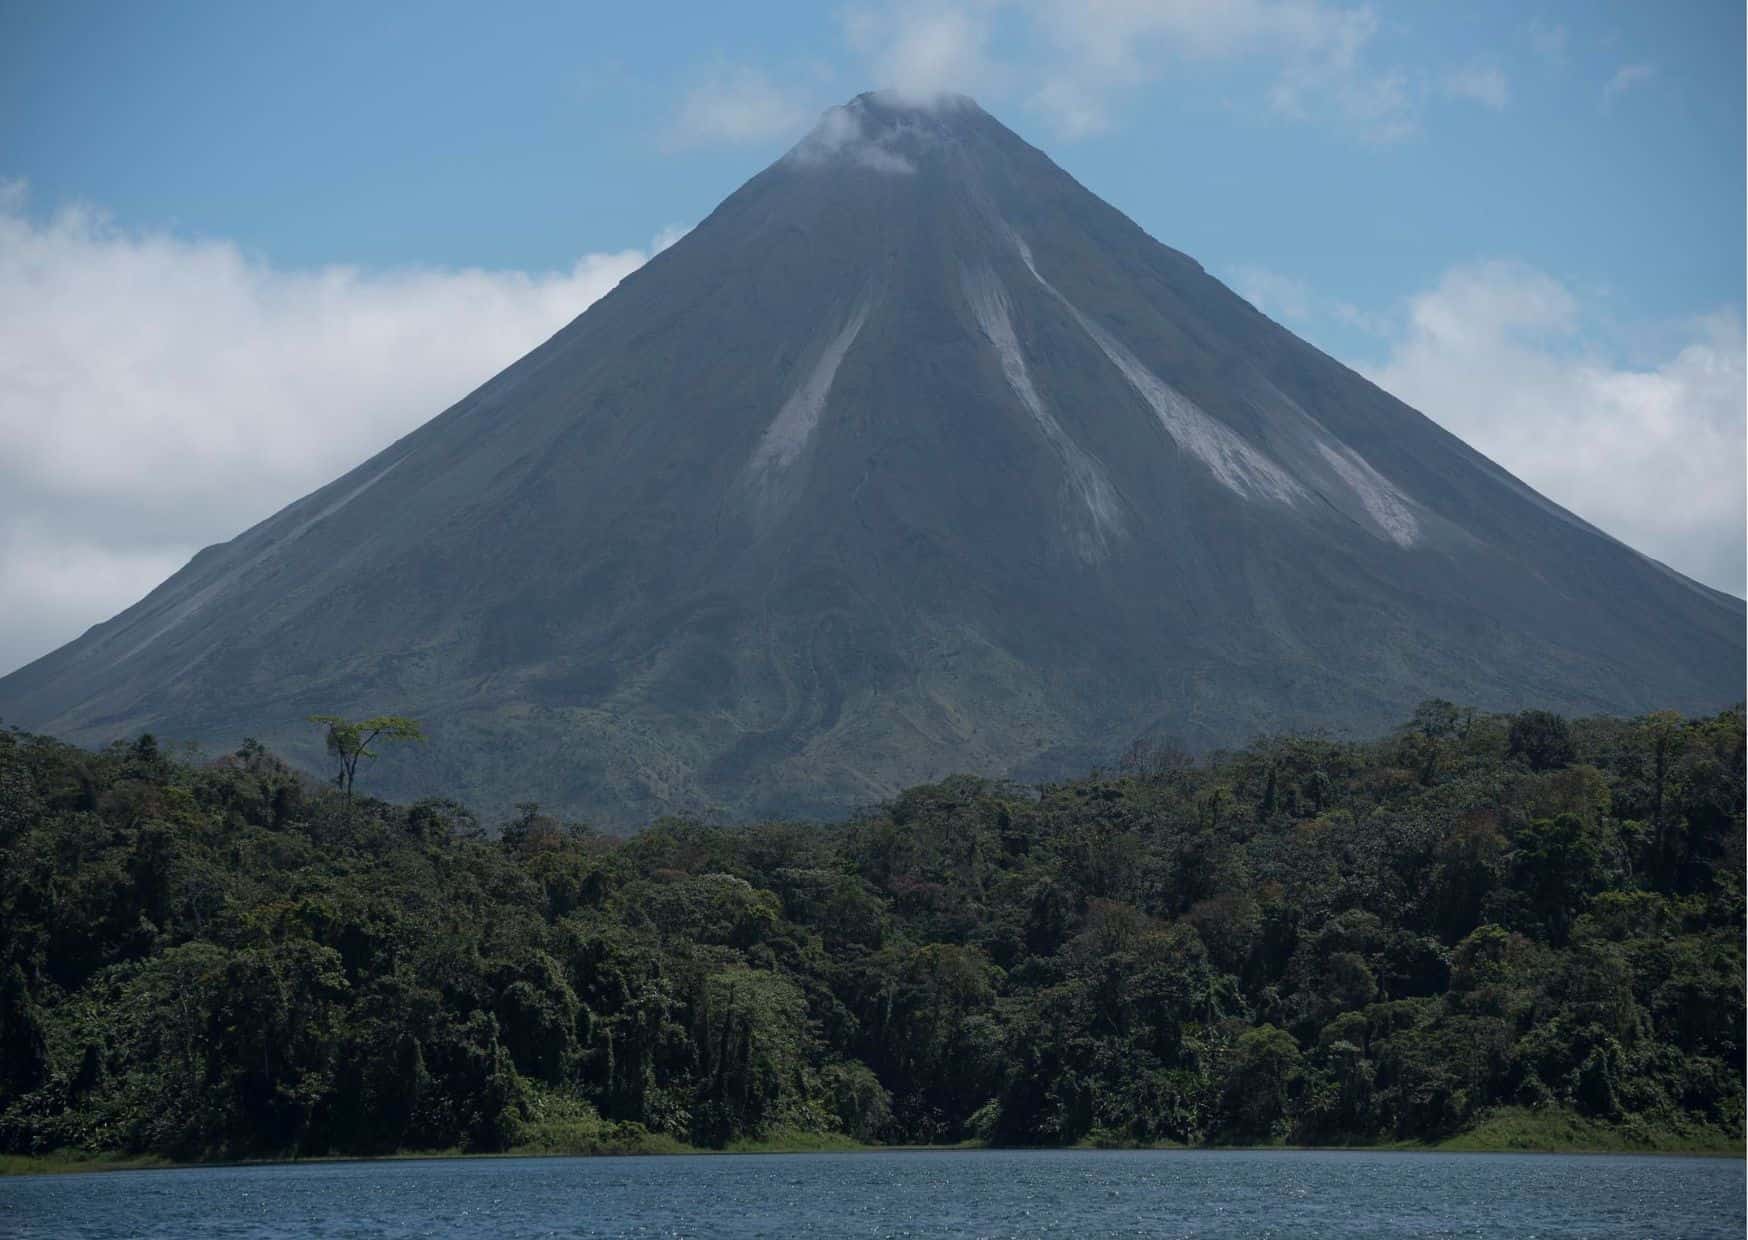 How To Get From Nosara To La Fortuna – All Possible Ways, Nosara to La Fortuna, cheapest way from Nosara to La Fortuna, best way from Nosara to La Fortuna, Nosara to La Fortuna by bus, bus from Nosara to La Fortuna, taxi from Nosara to La Fortuna, Uber from Nosara to La Fortuna, private transfer from Nosara to La Fortuna, Shared Van from Nosara to La Fortuna, rent a car at Nosara, Nosara to La Fortuna